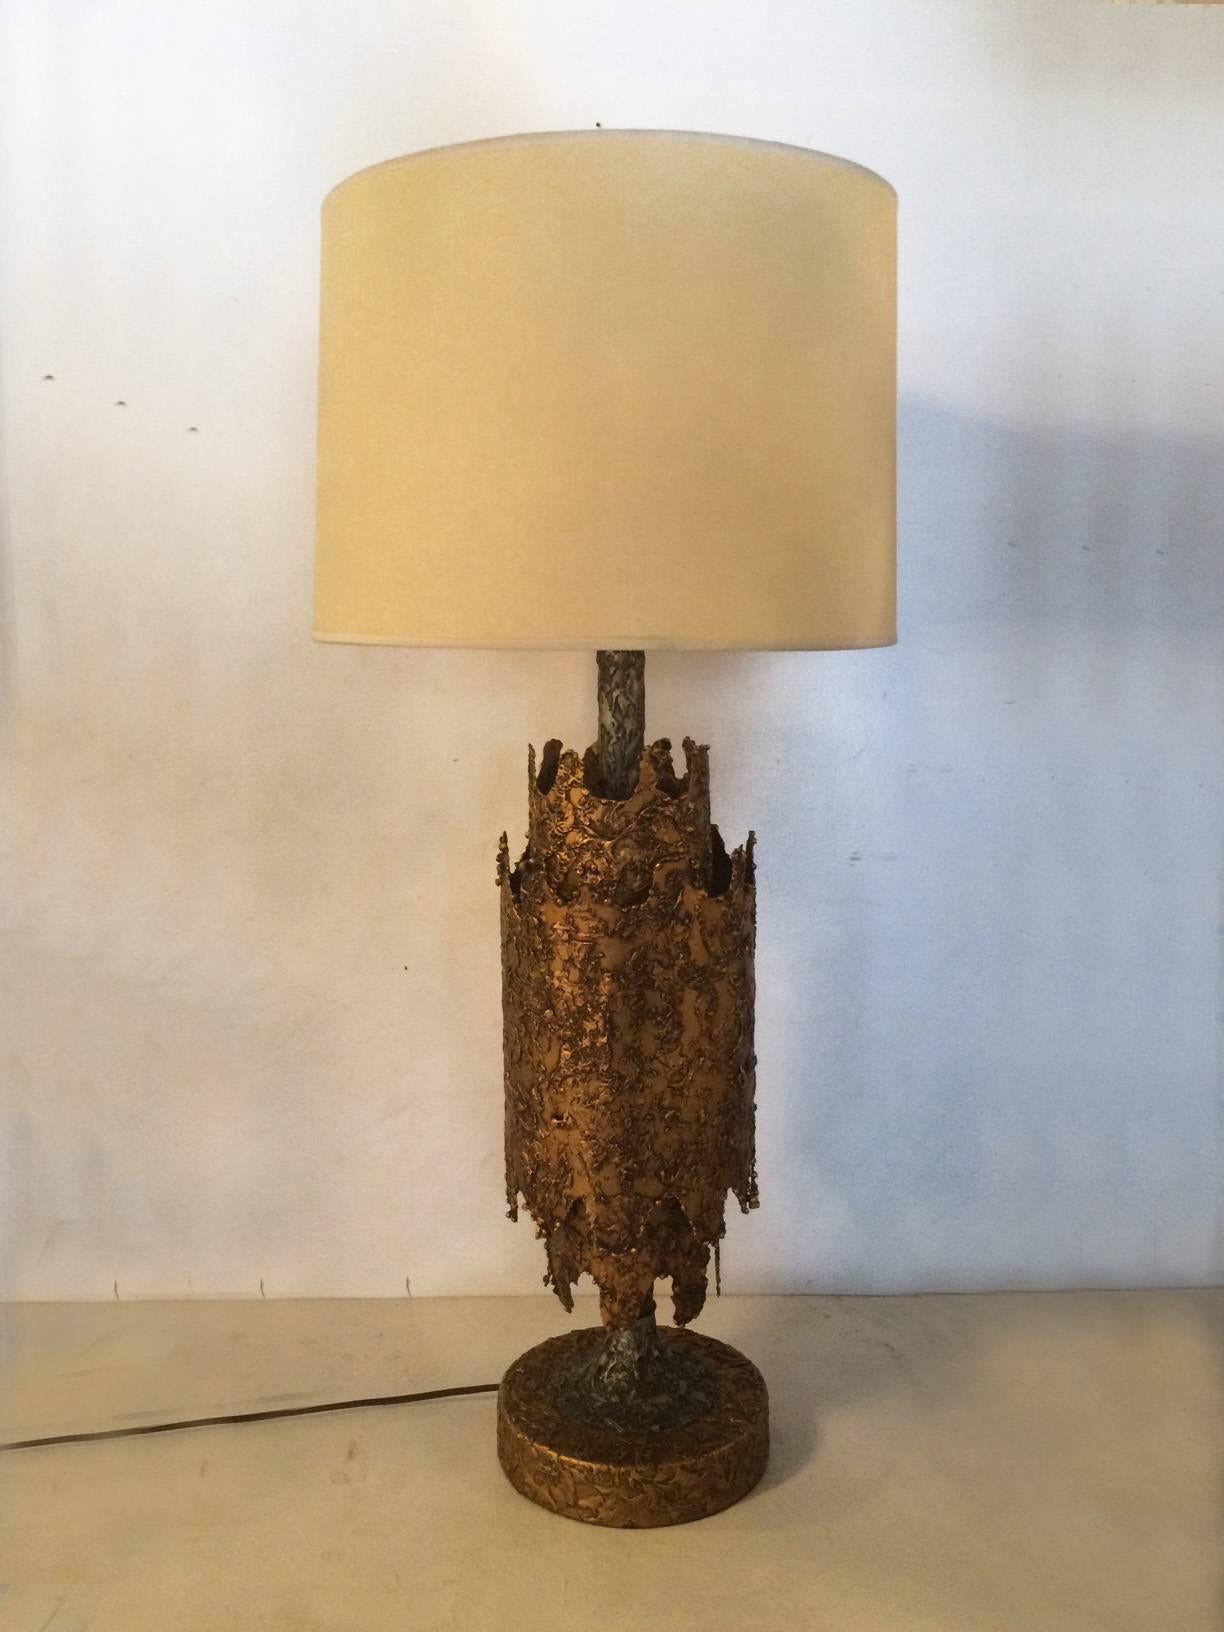 Lamp has two bulbs. One lights the base of the lamp and one the top. The switch first turns on, the bulb in the base, then top light and then with one more turn of switch both light bulbs at once. 
Without the shade, the base is 8